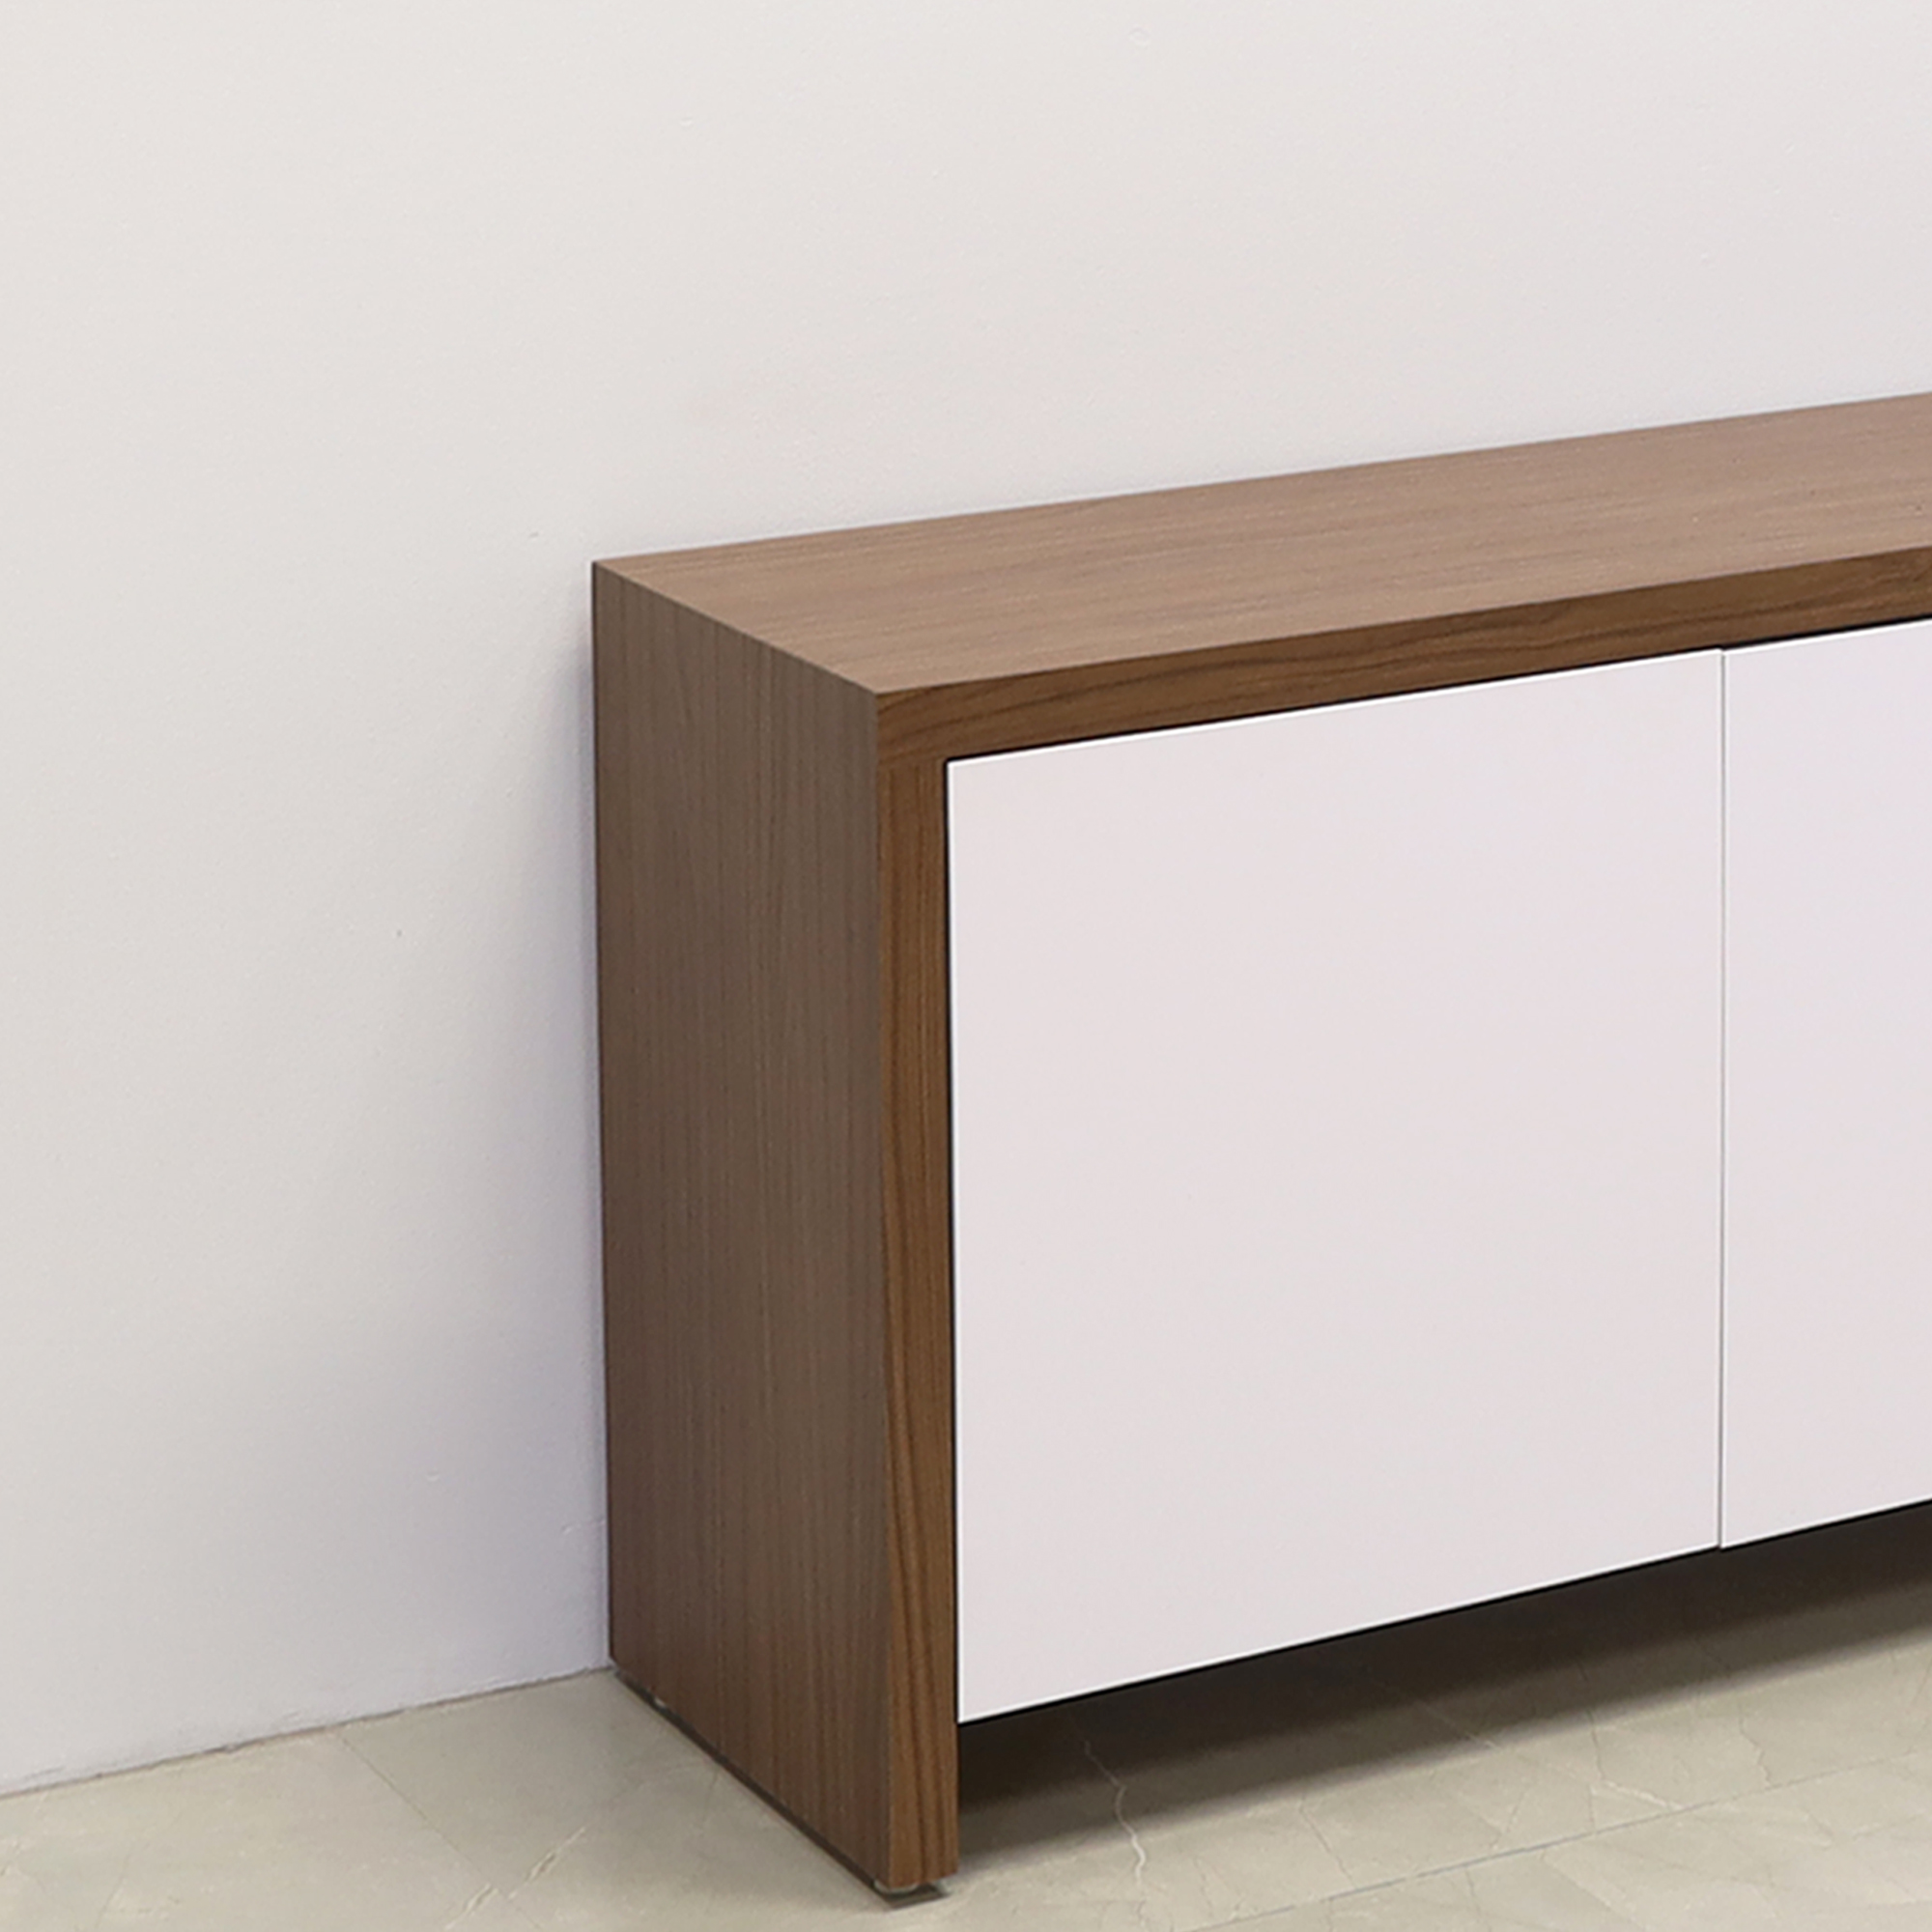 74 inches Boston Storage Credenza in walnut heights laminate credenza and white matte laminate doors with push mechanism shown here.